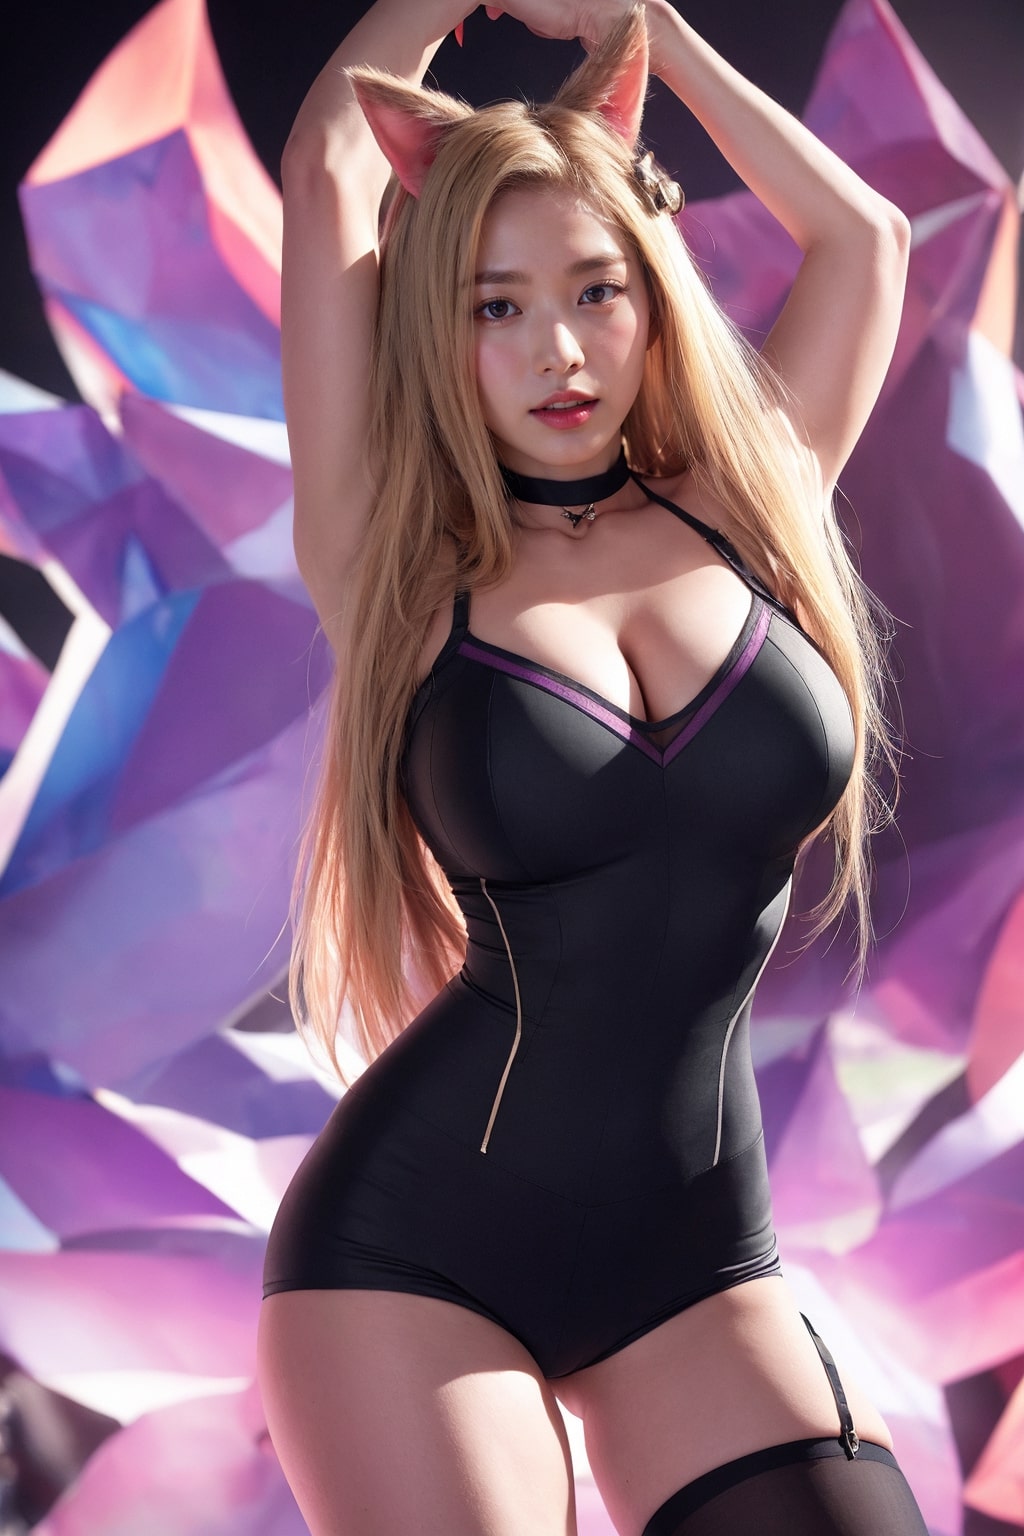 This is a collection of live-action photos created by AI attempting to cosplay K/DA Ari, but failing to do so.